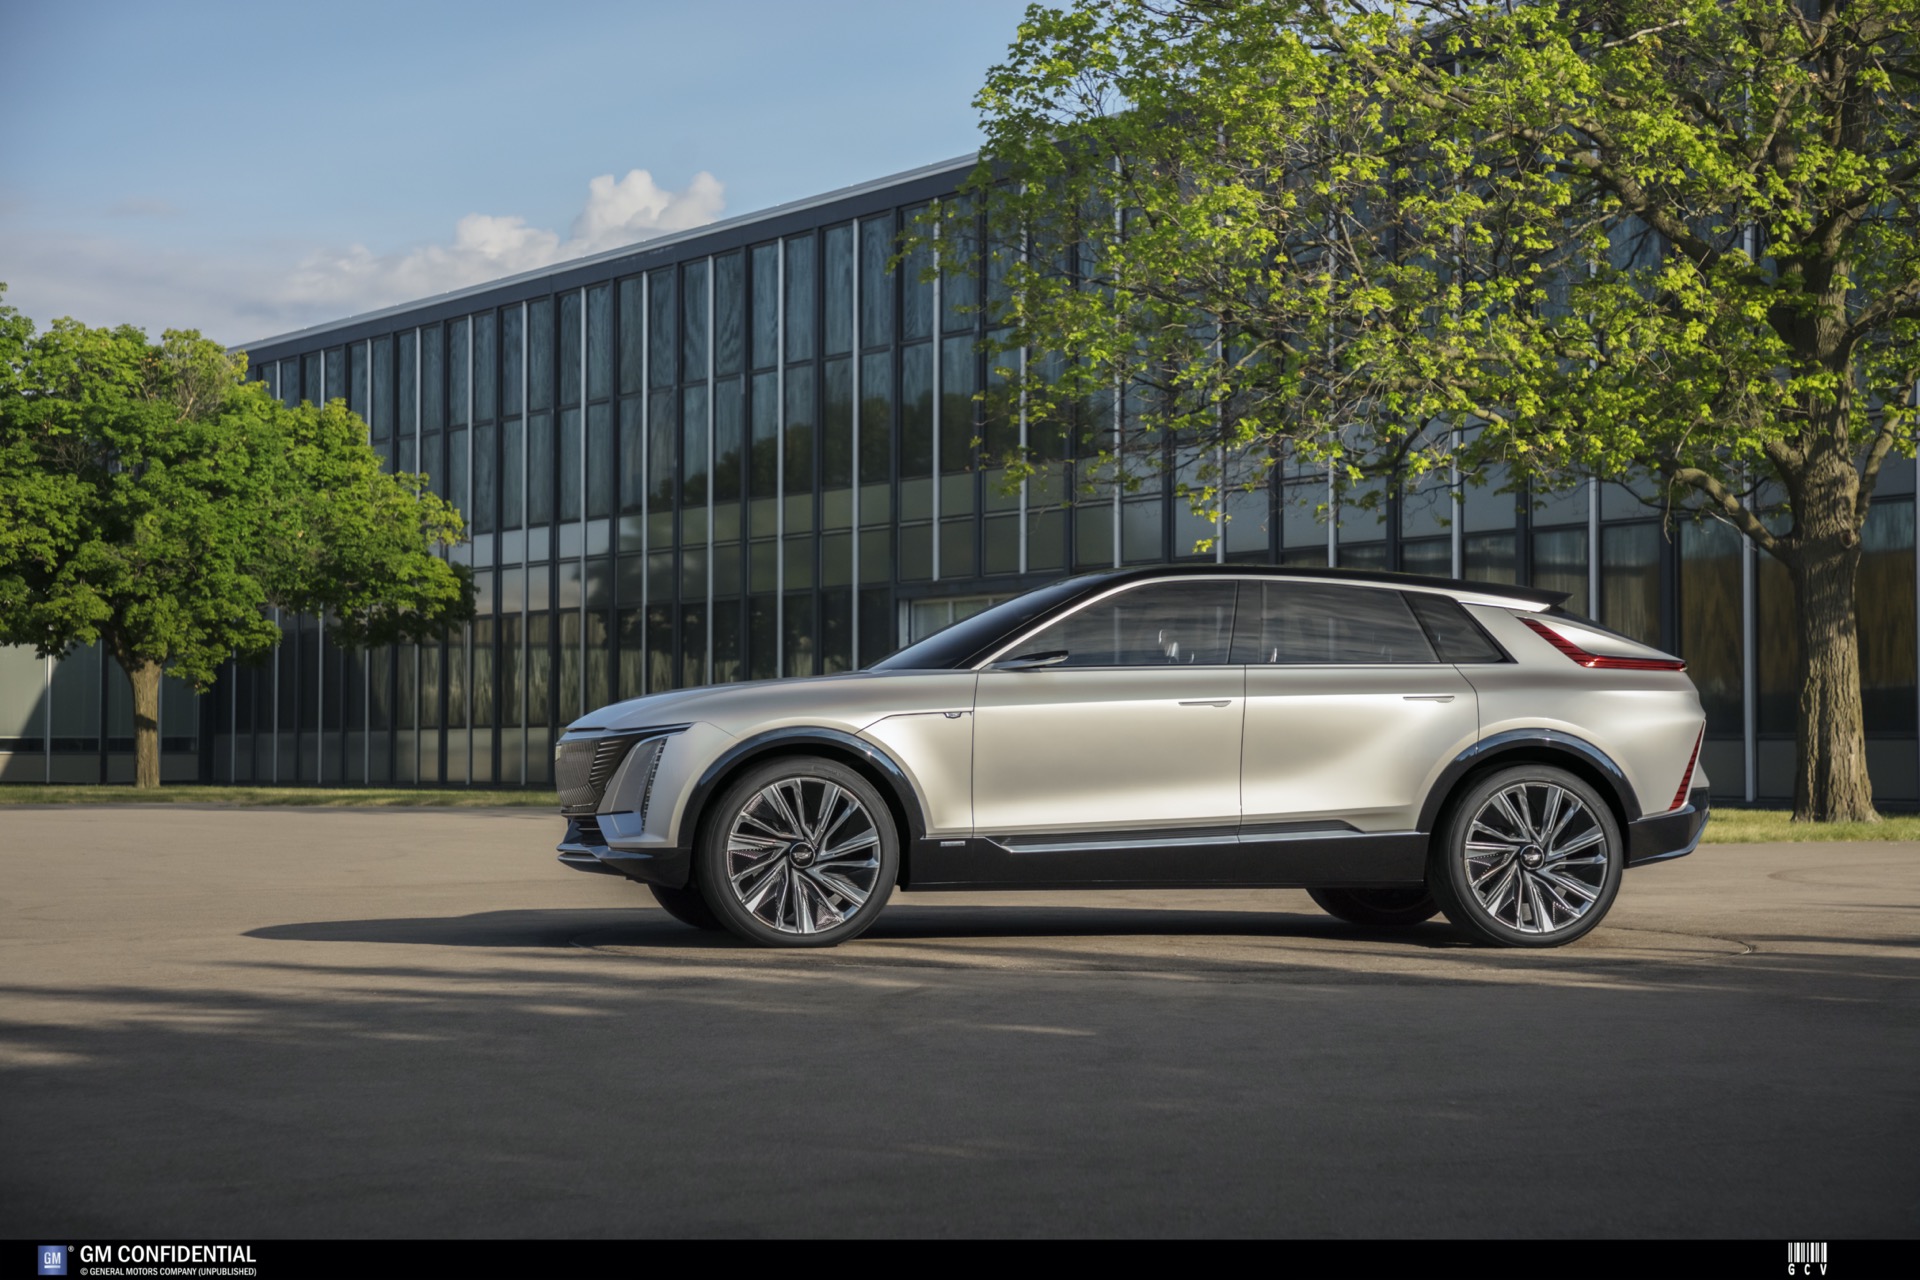 Cadillac Lyriq electric SUV pulled forward for early 2022 US arrival